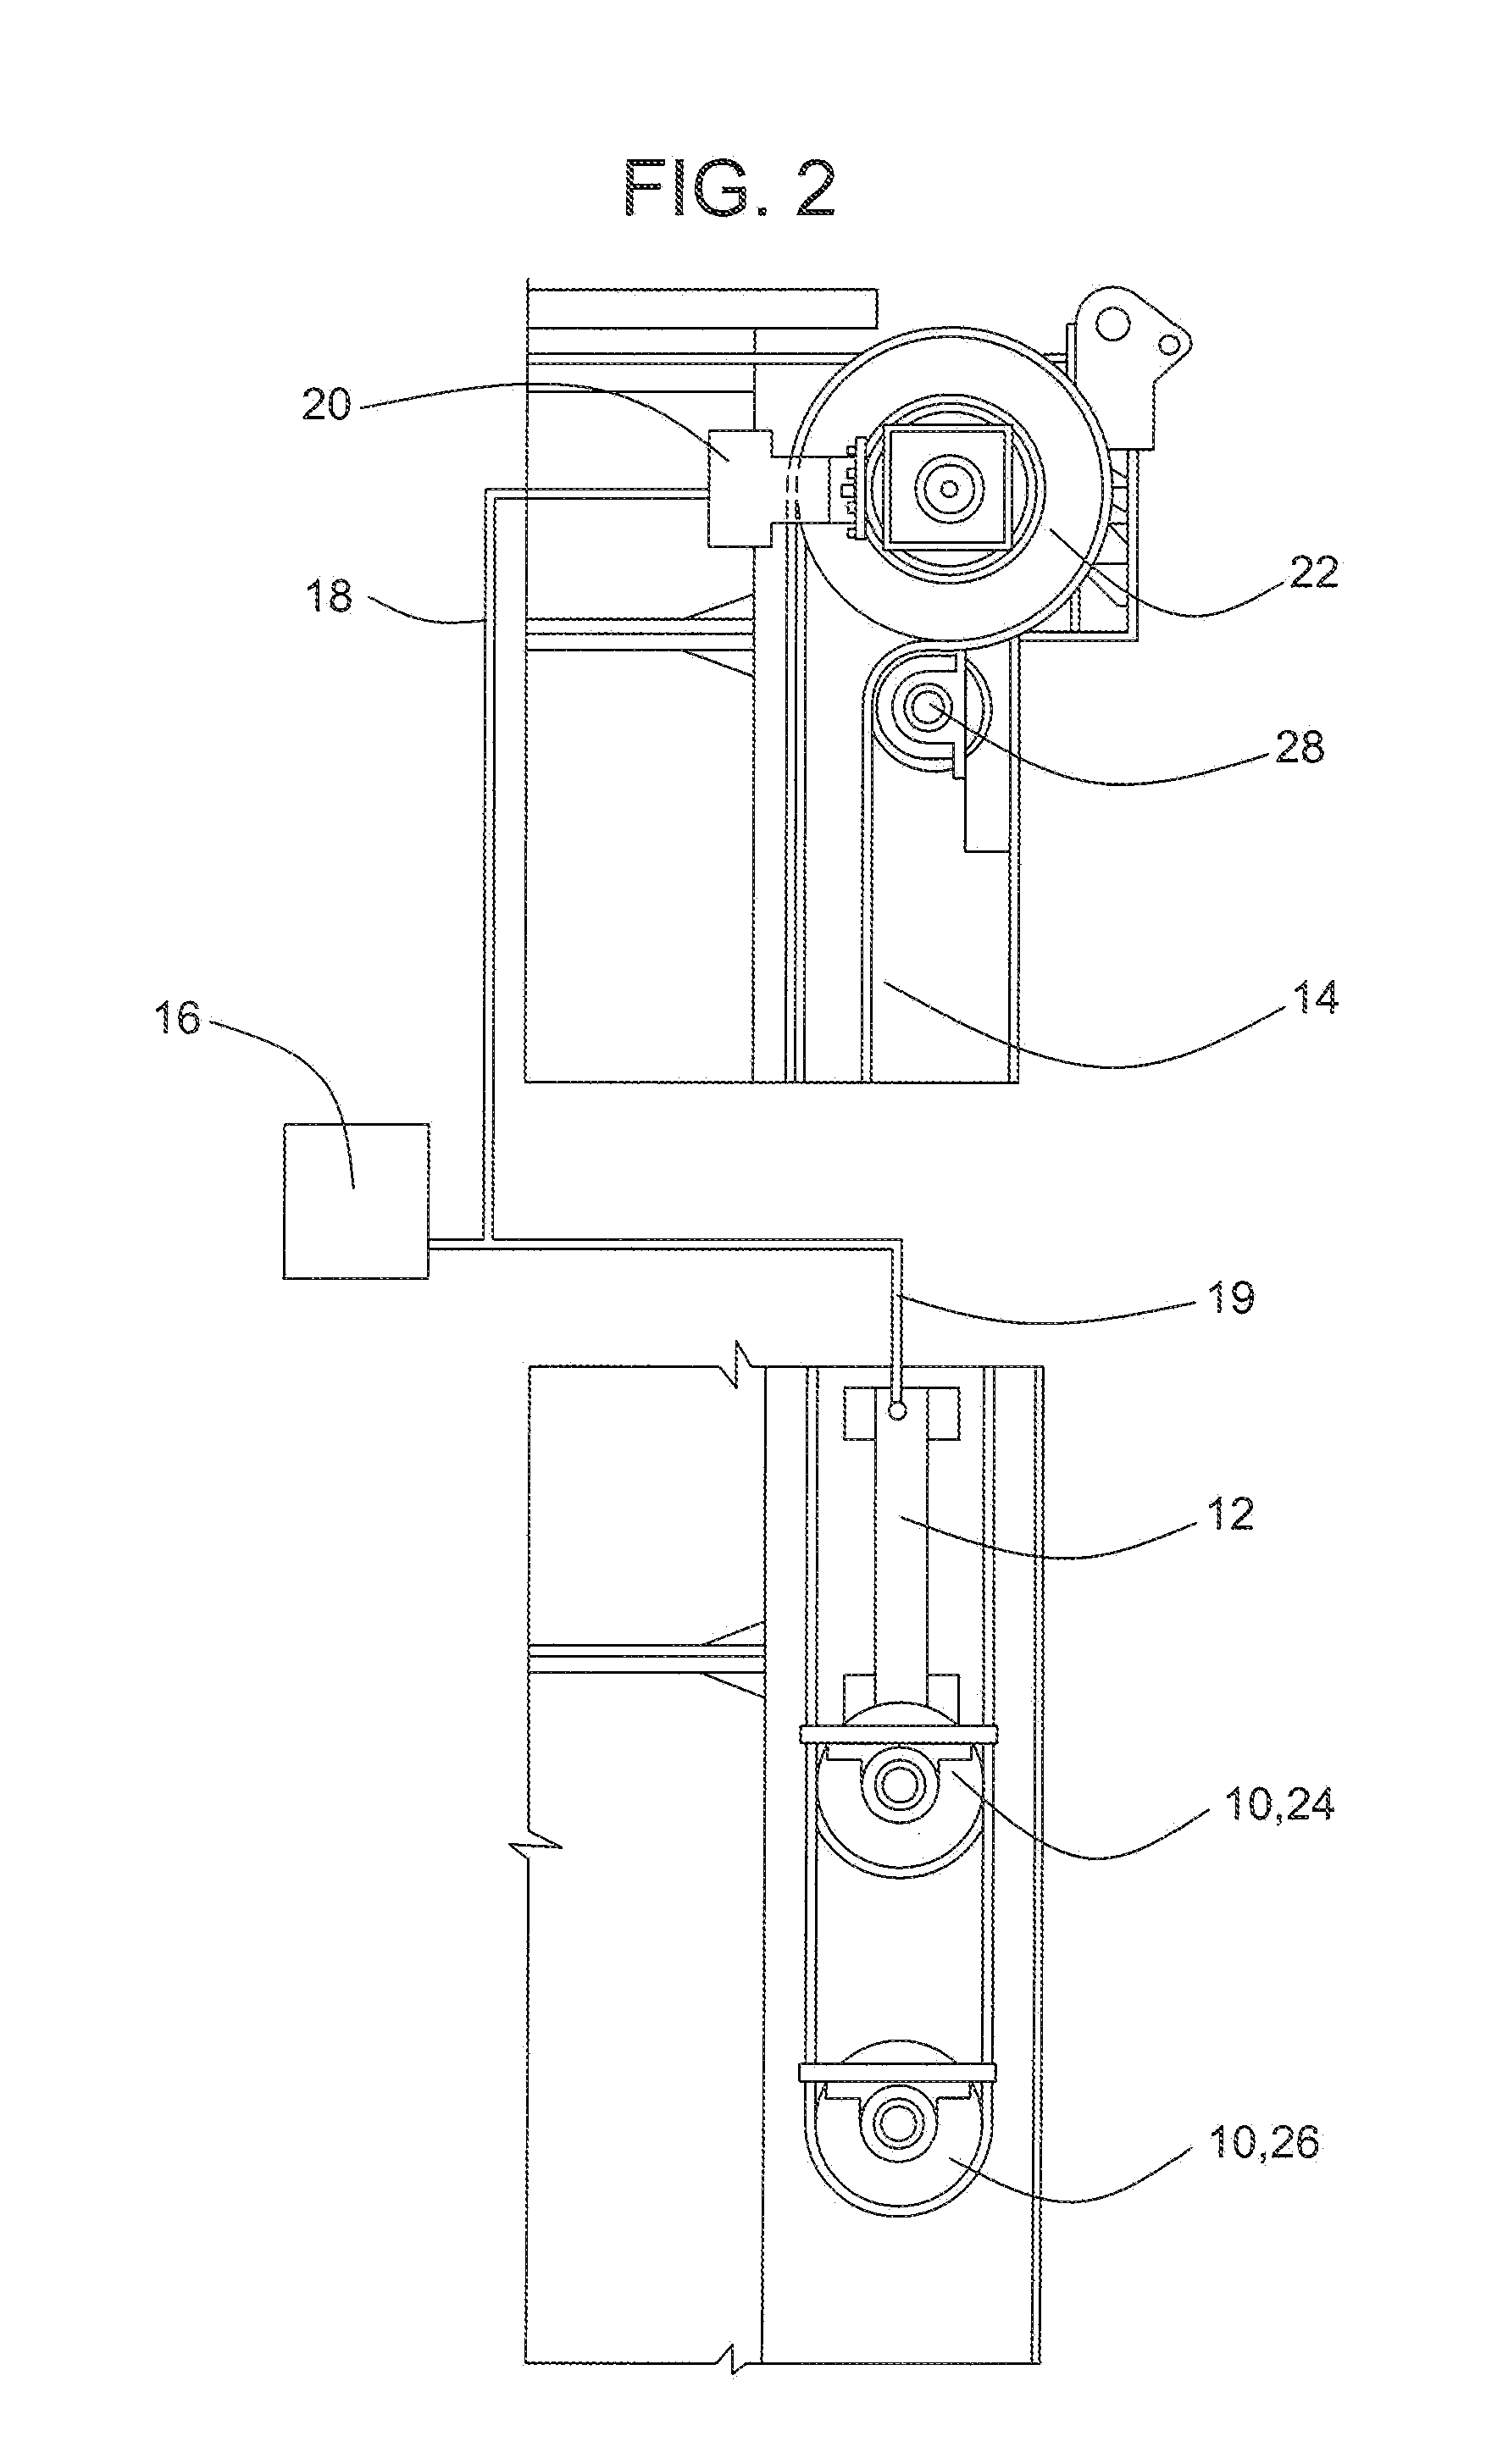 Conveyor system for vehicle